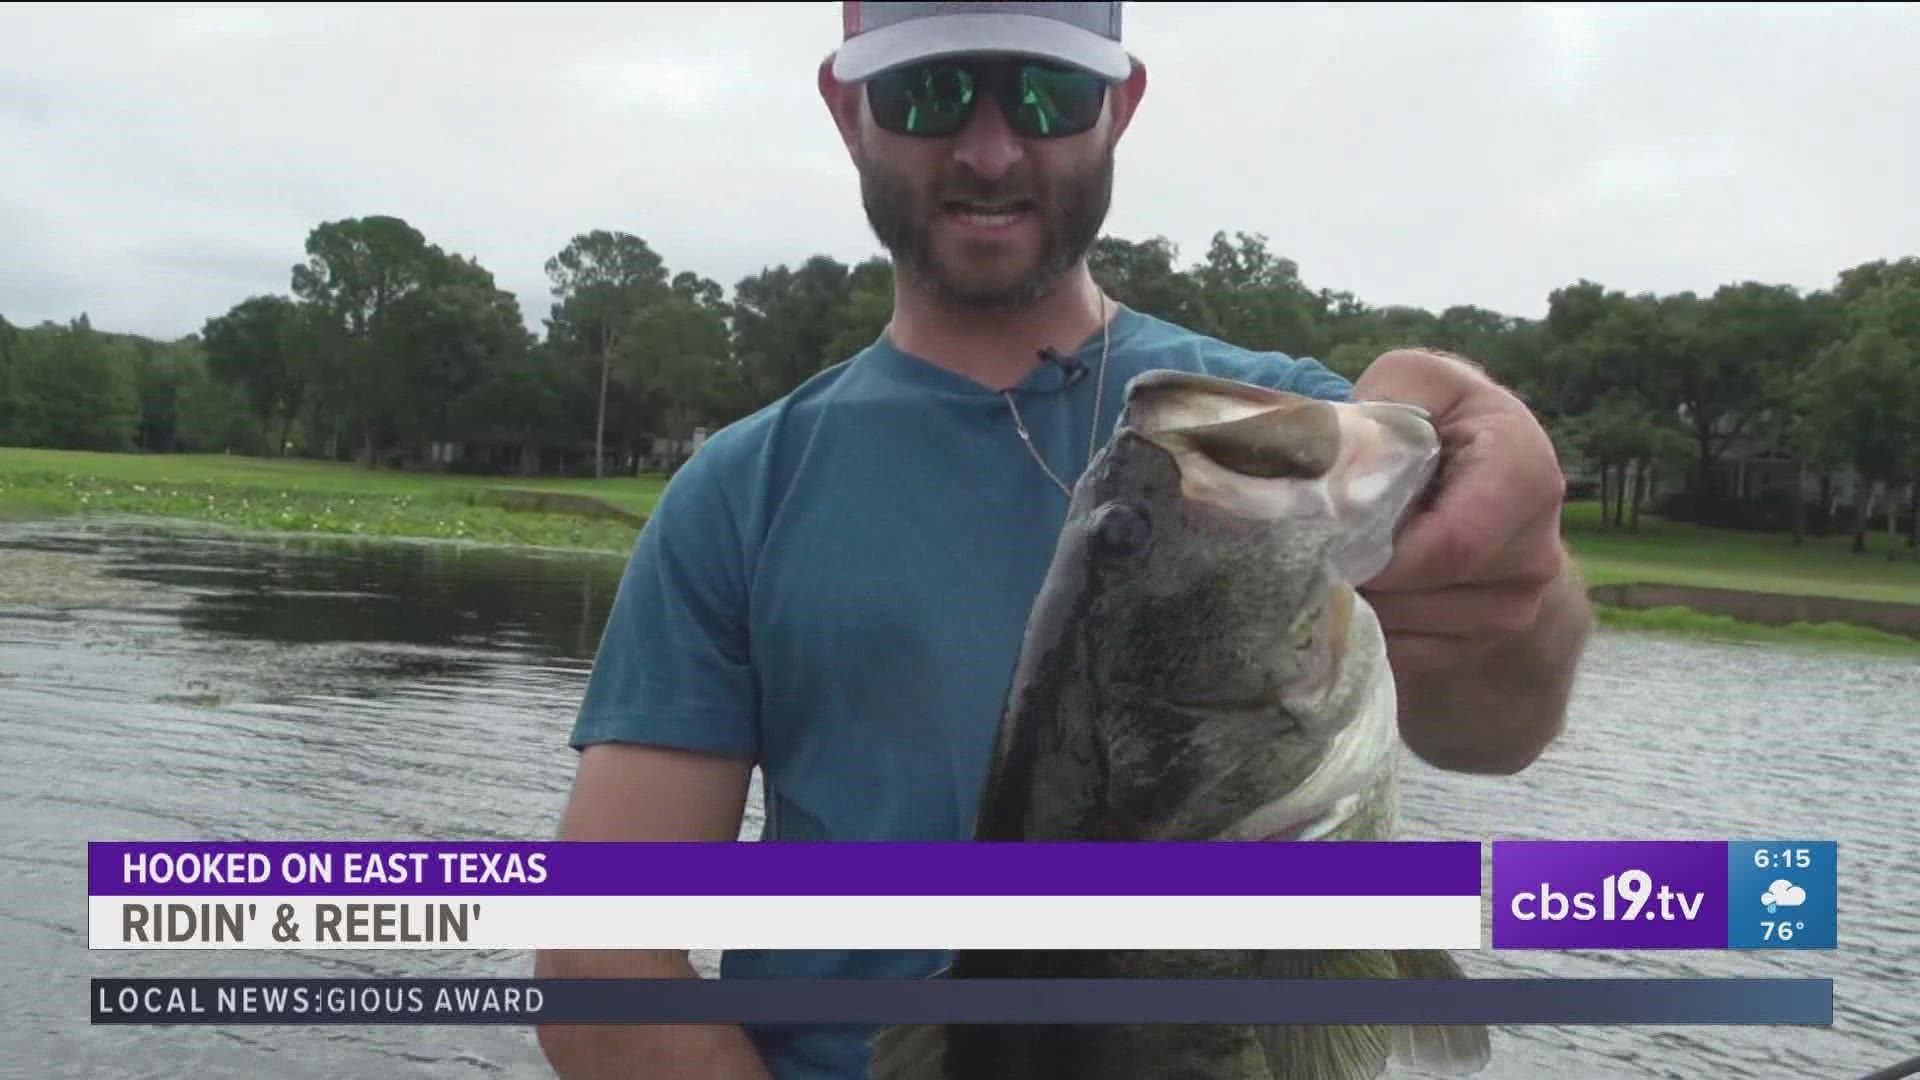 For more Hooked On East Texas, visit cbs19.tv